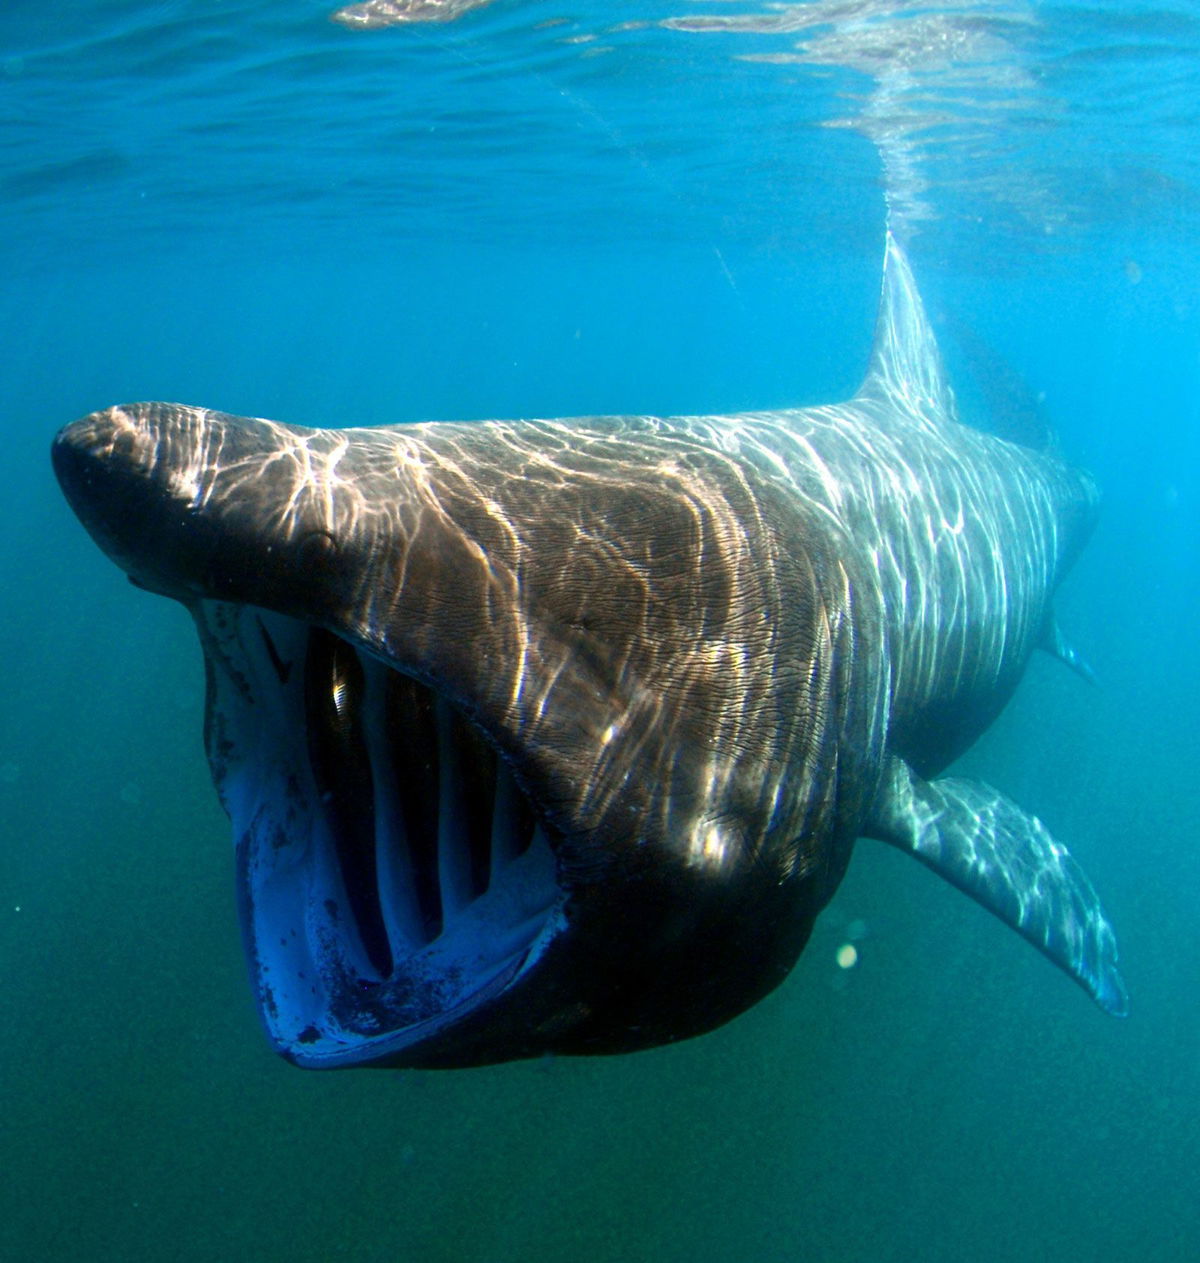 <i>HUM Images/UIG/Getty Images/File via CNN Newsource</i><br/>This file photo shows a basking shark